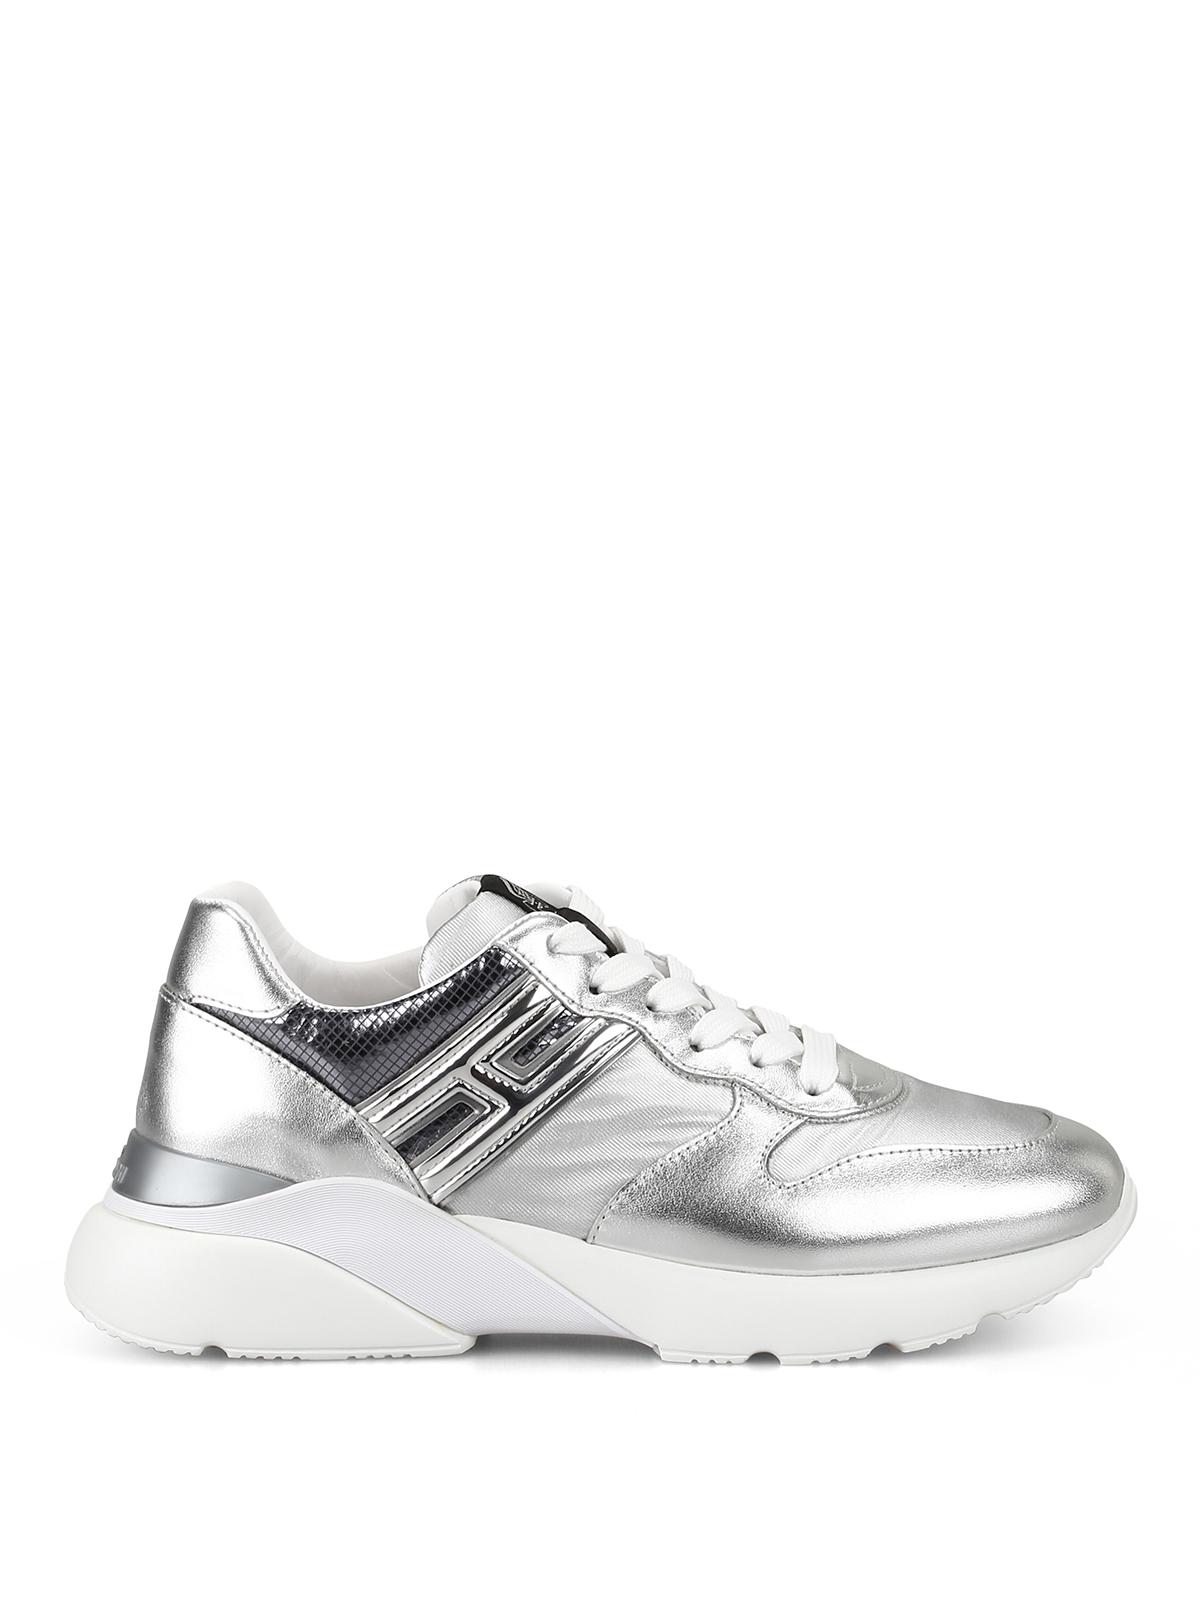 Hogan Leather Active One Silver Sneakers in Metallic - Lyst